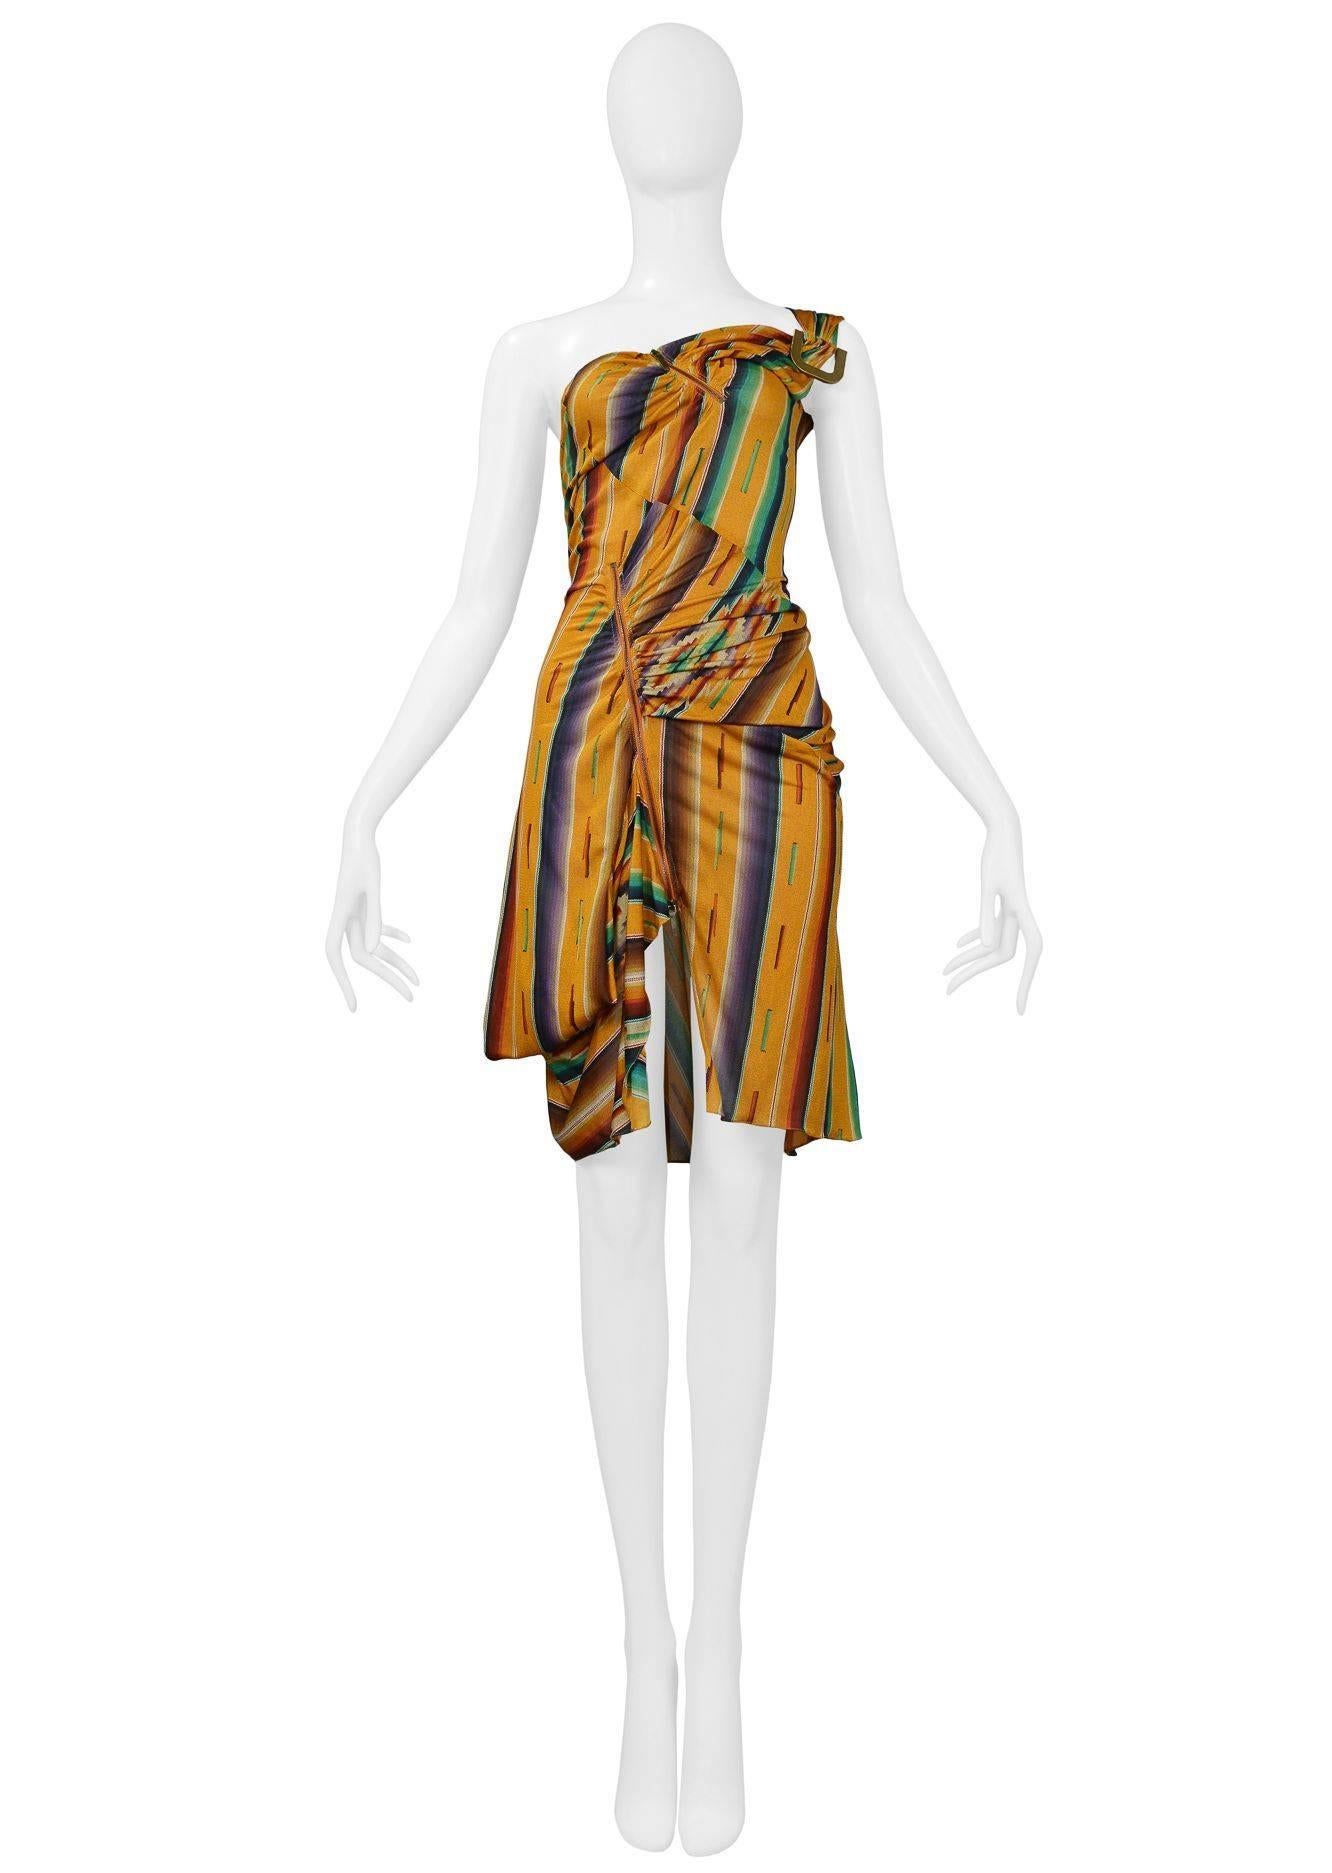 Christian Dior by John Galliano multi colored Navajo style stripe jersey dress with asymmetrical neckline and hem. Dress features brass hardware at shoulder and brass exposed zippers throughout. Collection SS 2002.